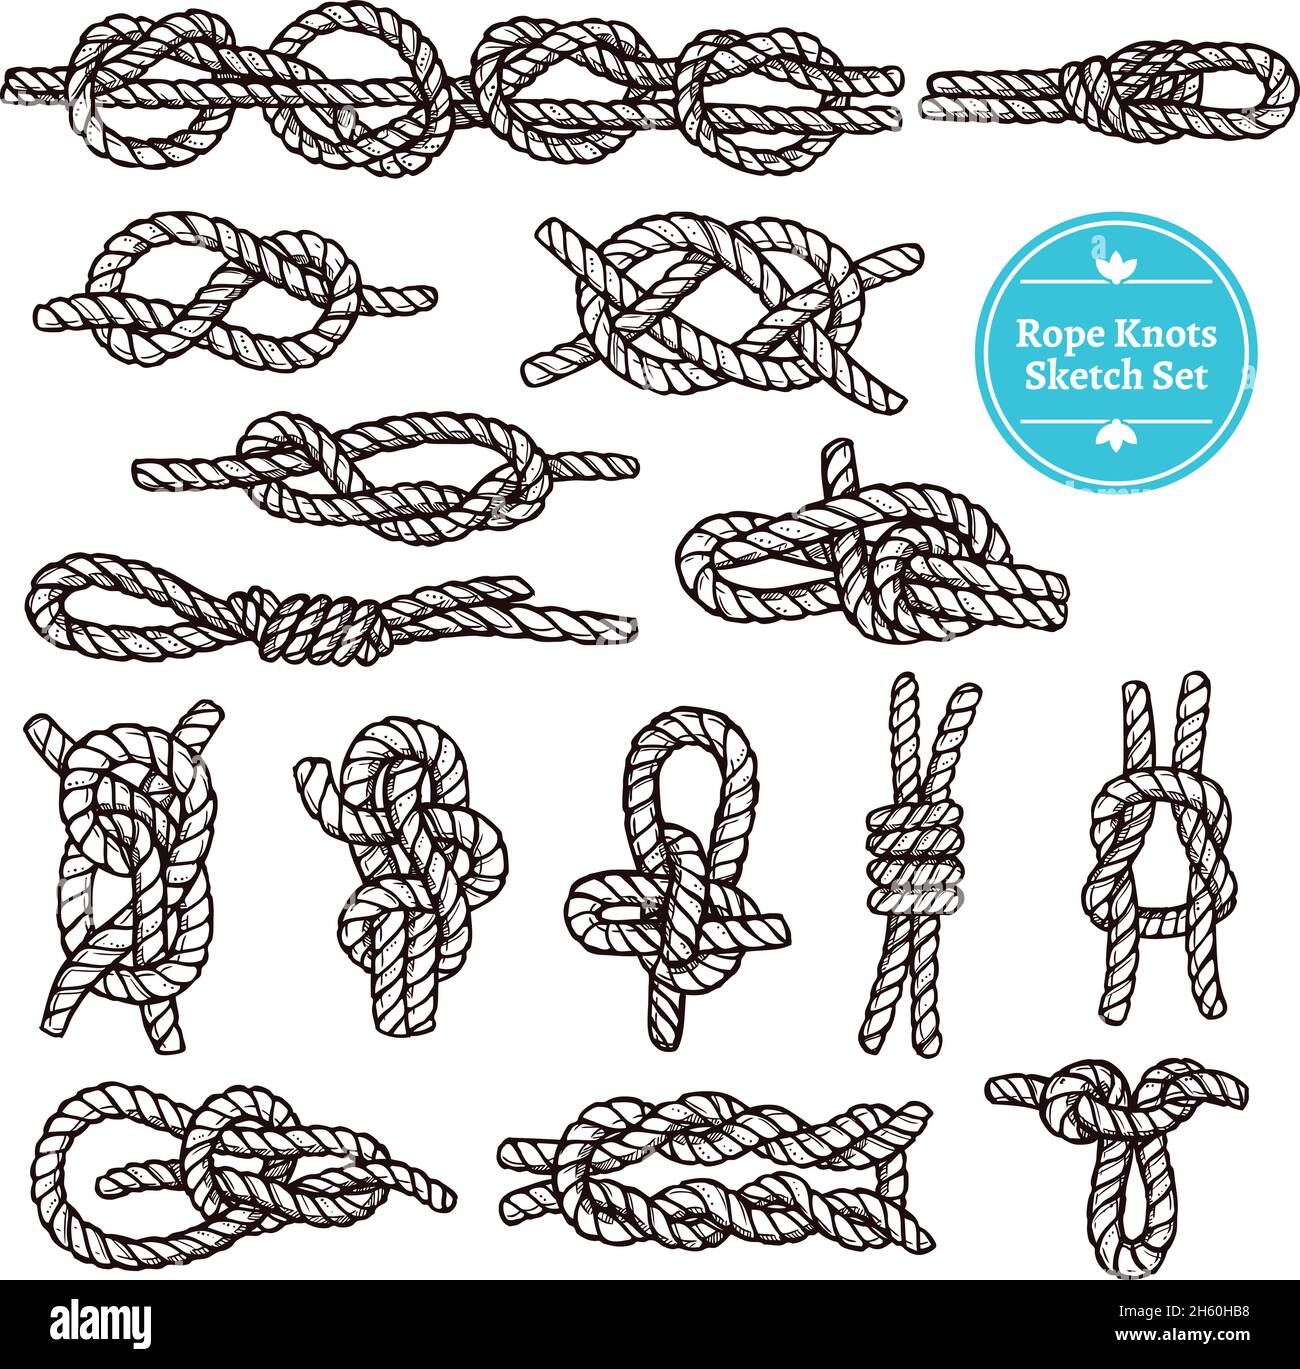 Rope knots sketch set with different hitches and bends on white background isolated vector illustration Stock Vector